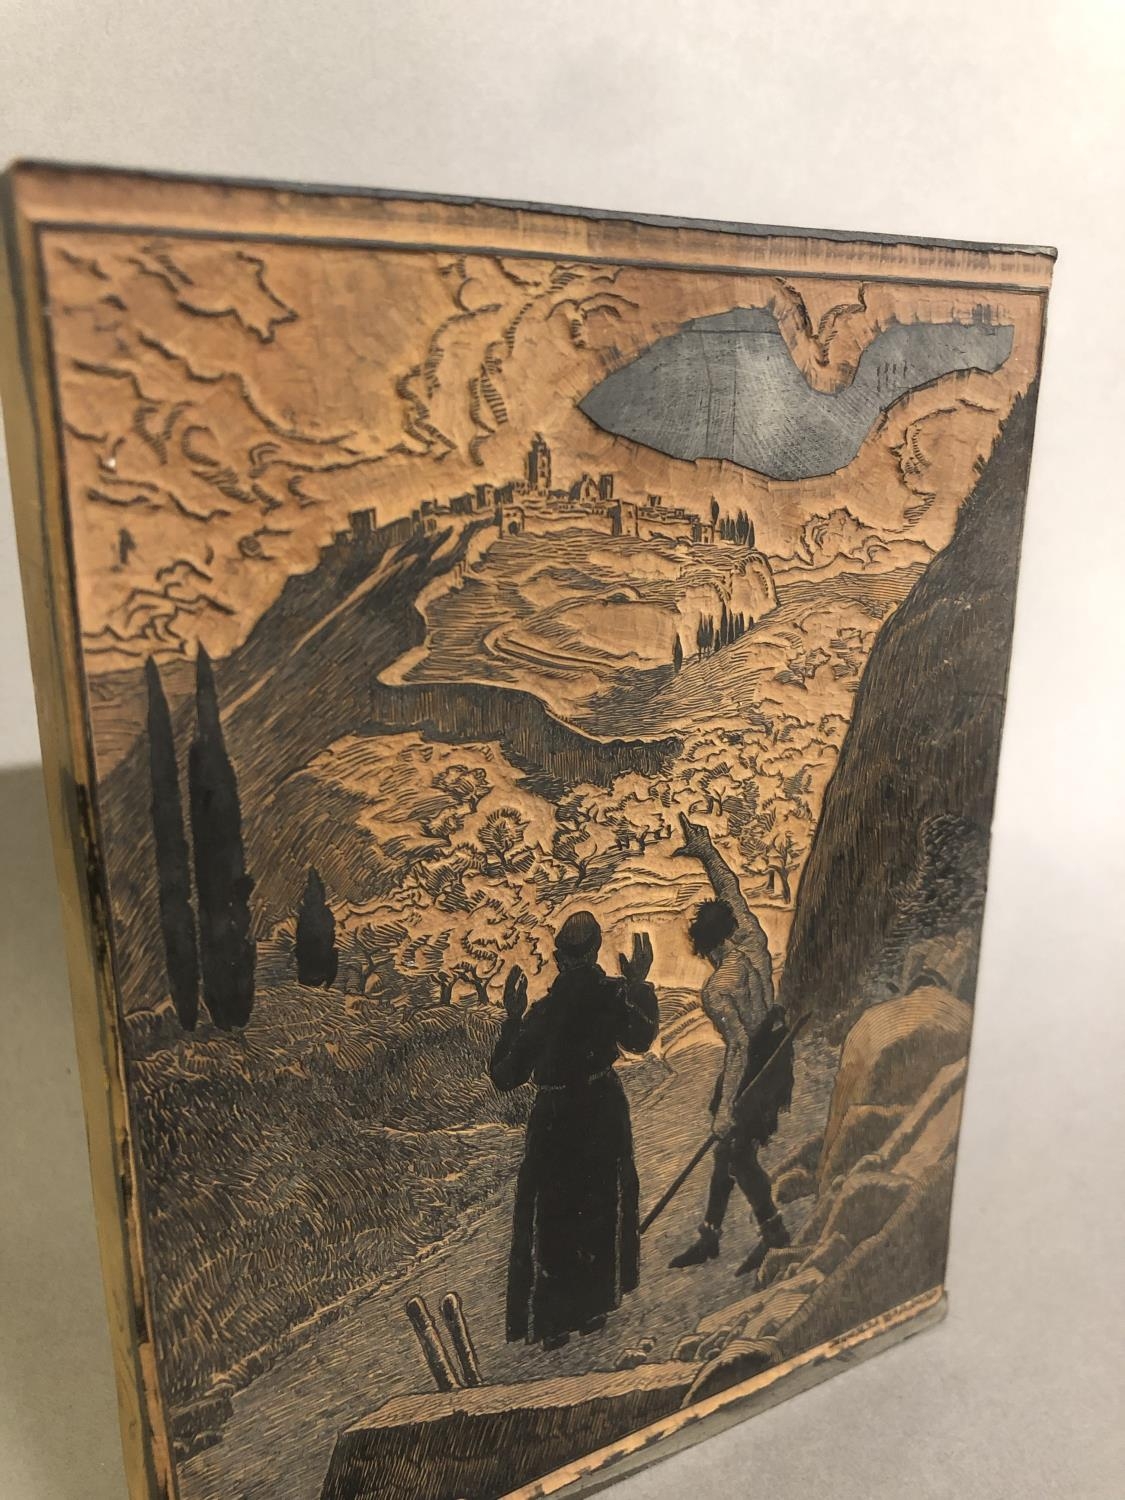 Antique French wood printing blocks, one figurative, with a monk being guided to a hilltop fortified - Image 3 of 4